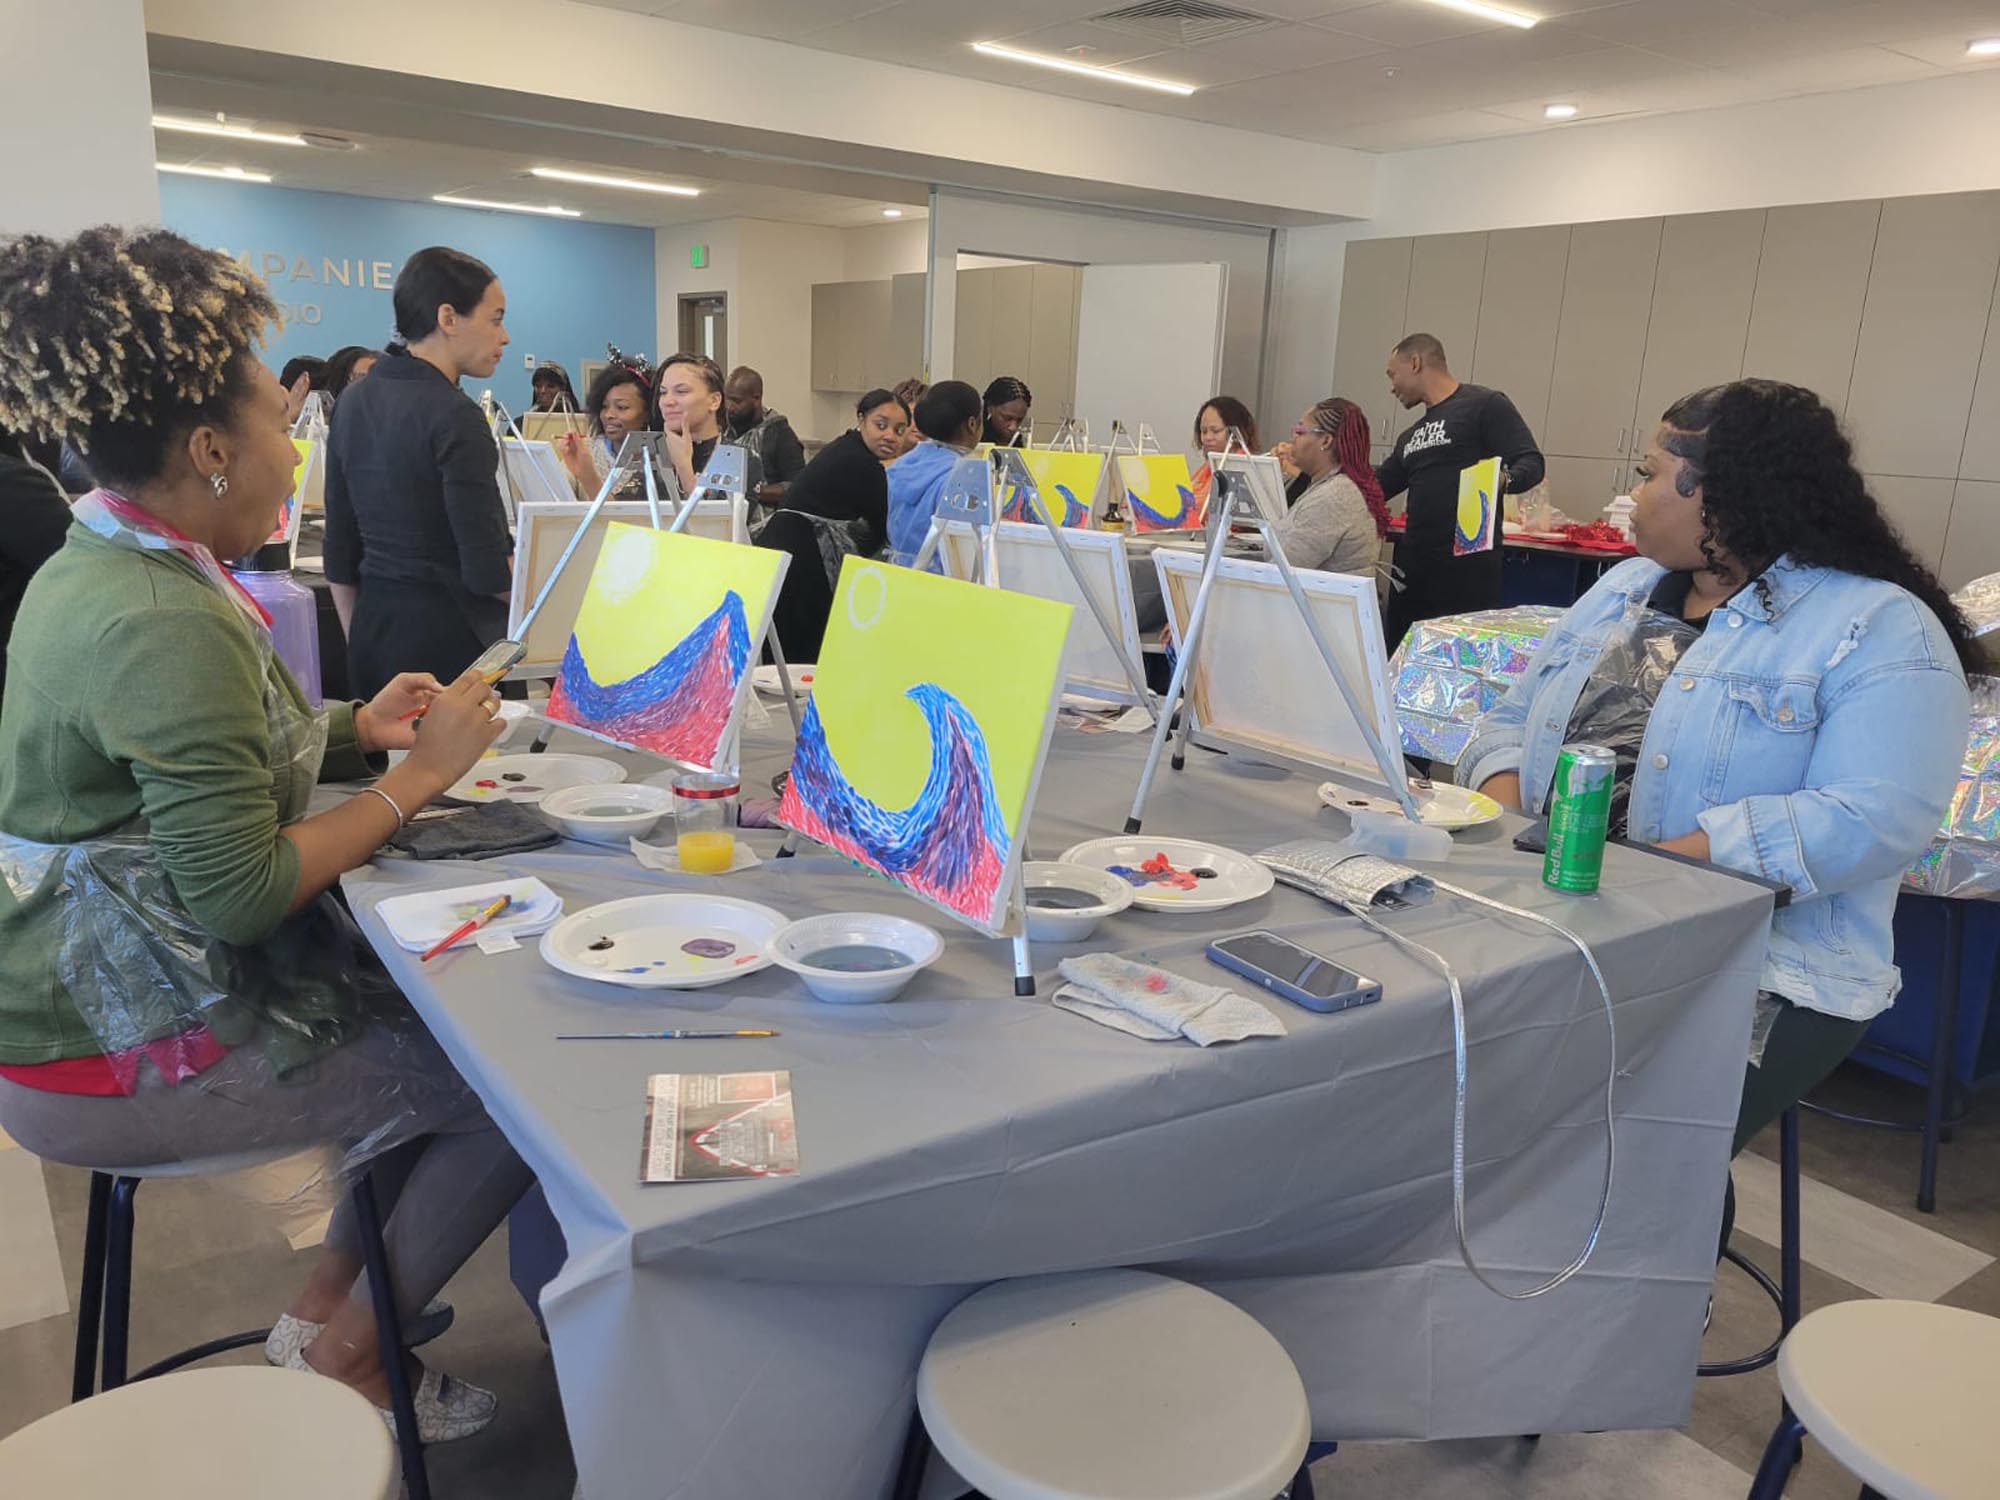 The OYC team participates in painting with Paint with Faith and works on creating unique art during the event.